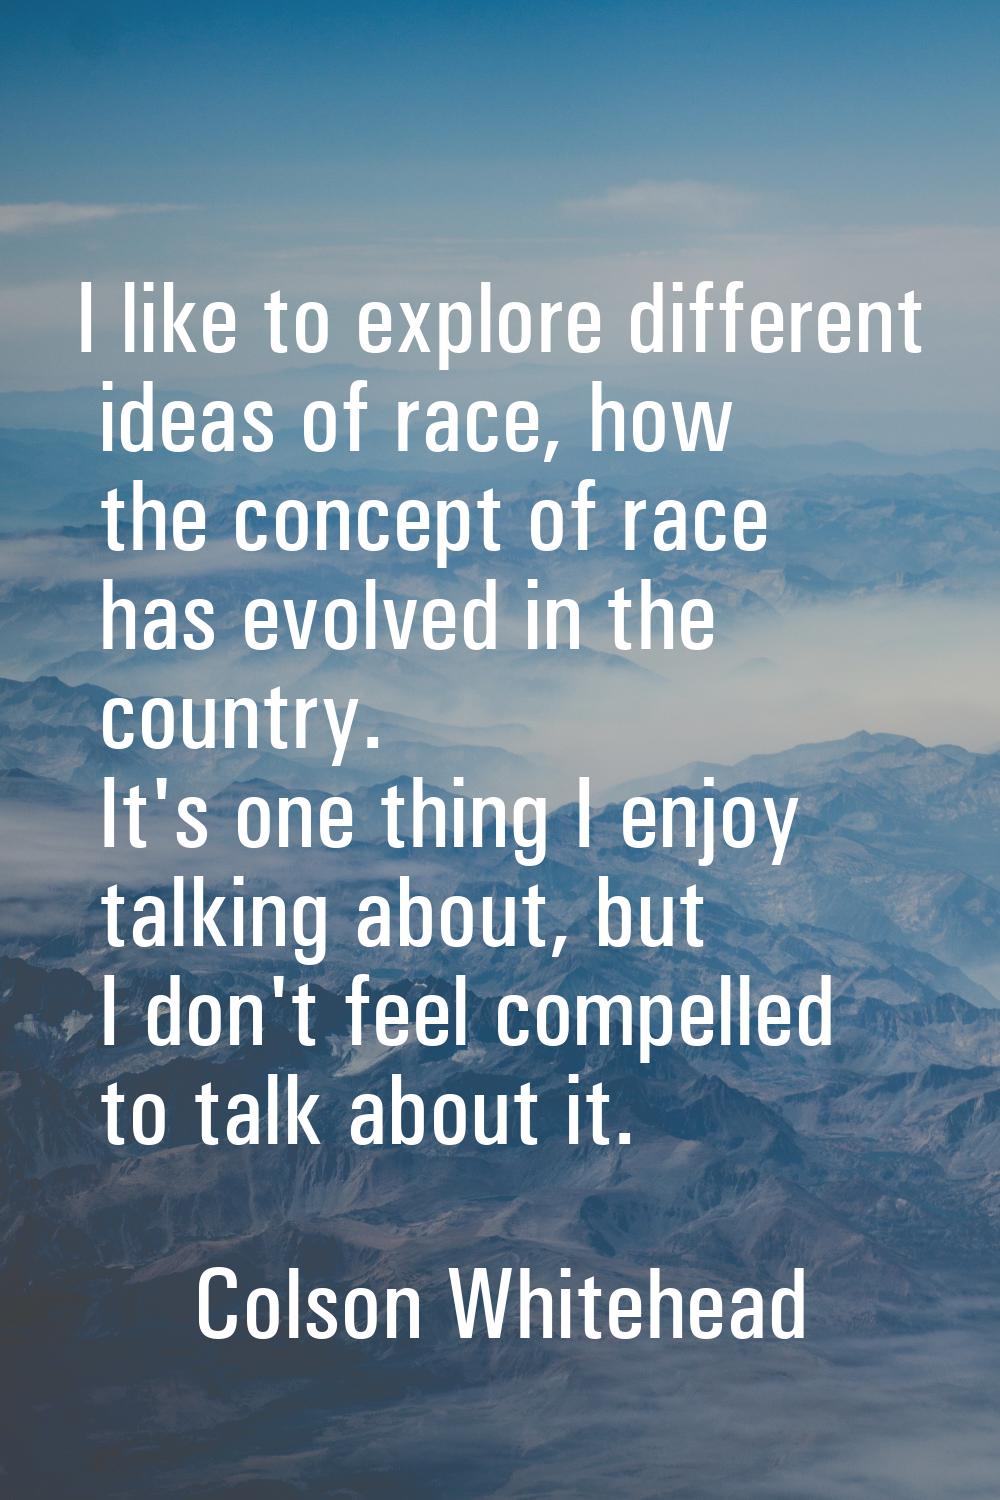 I like to explore different ideas of race, how the concept of race has evolved in the country. It's